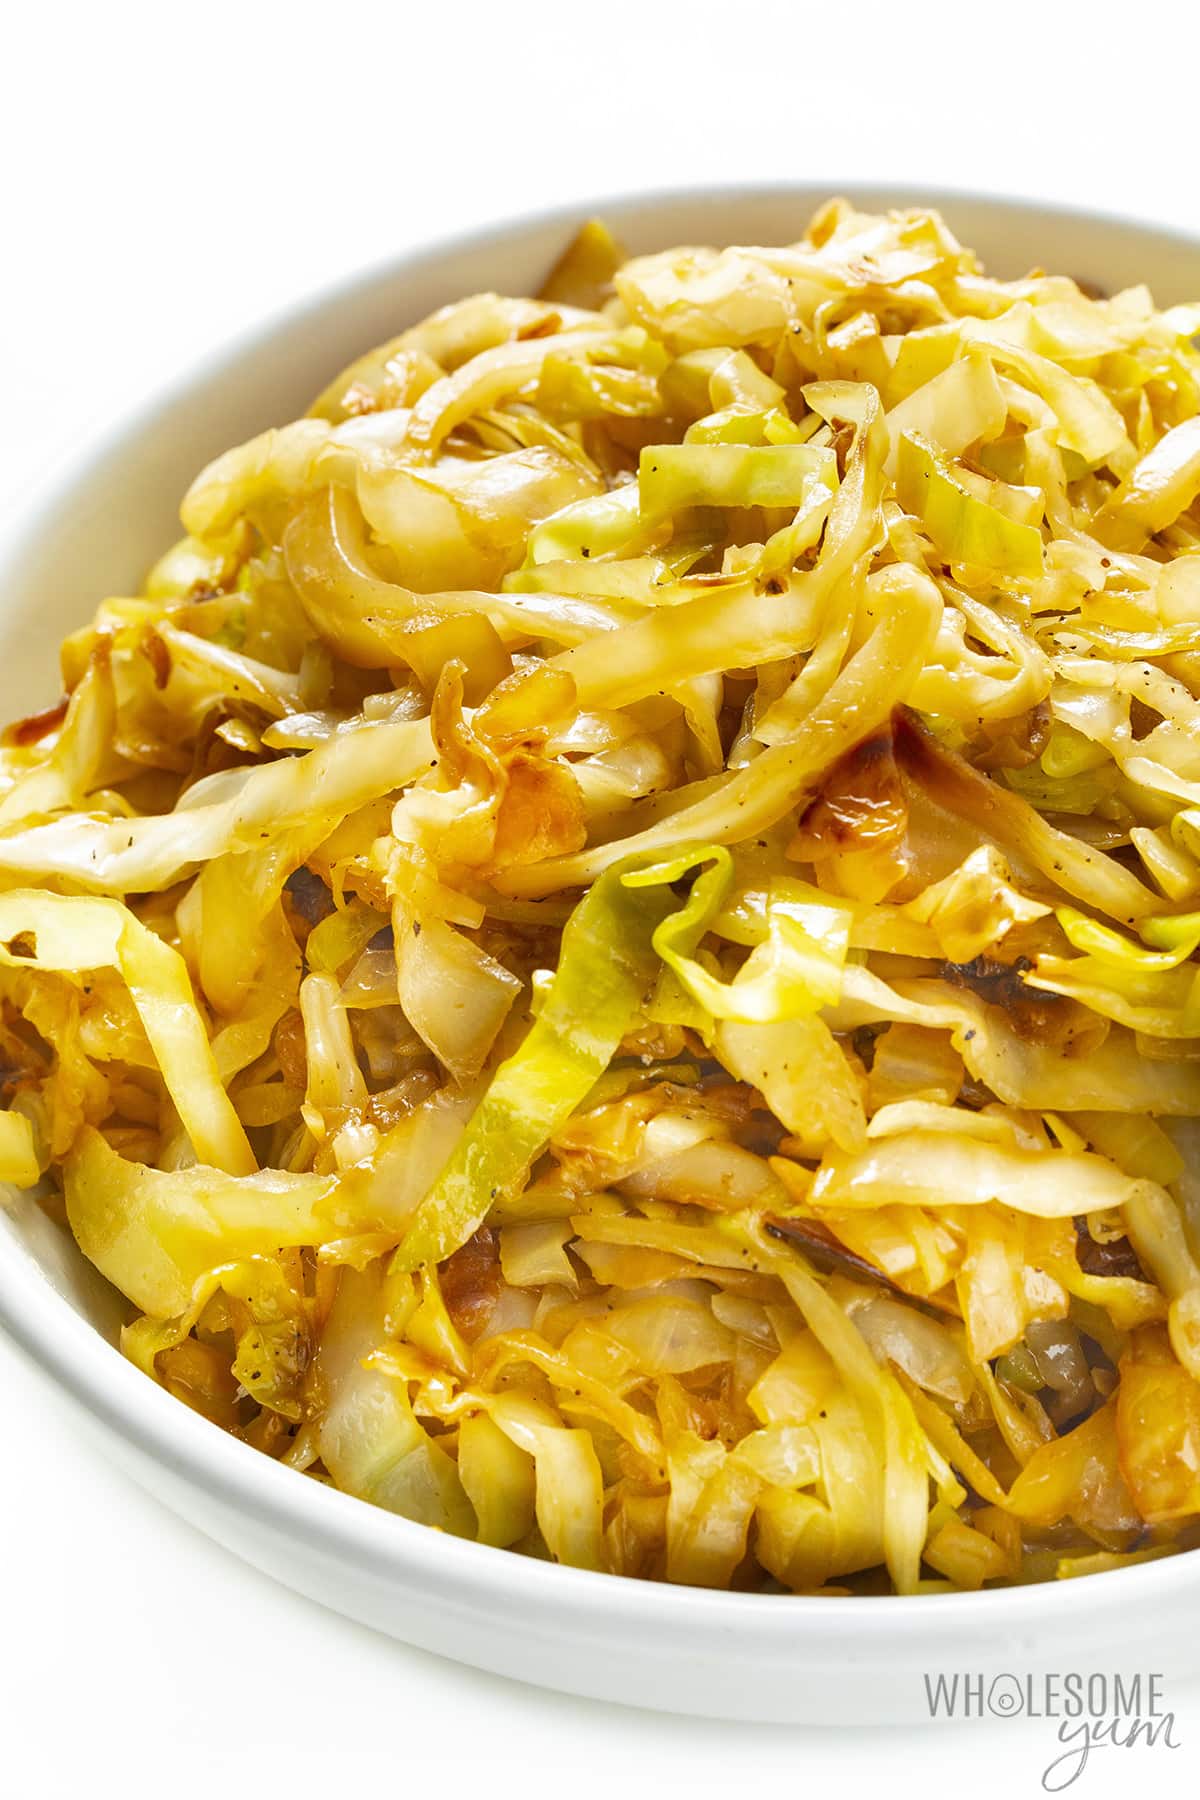 Cooked cabbage in a bowl.